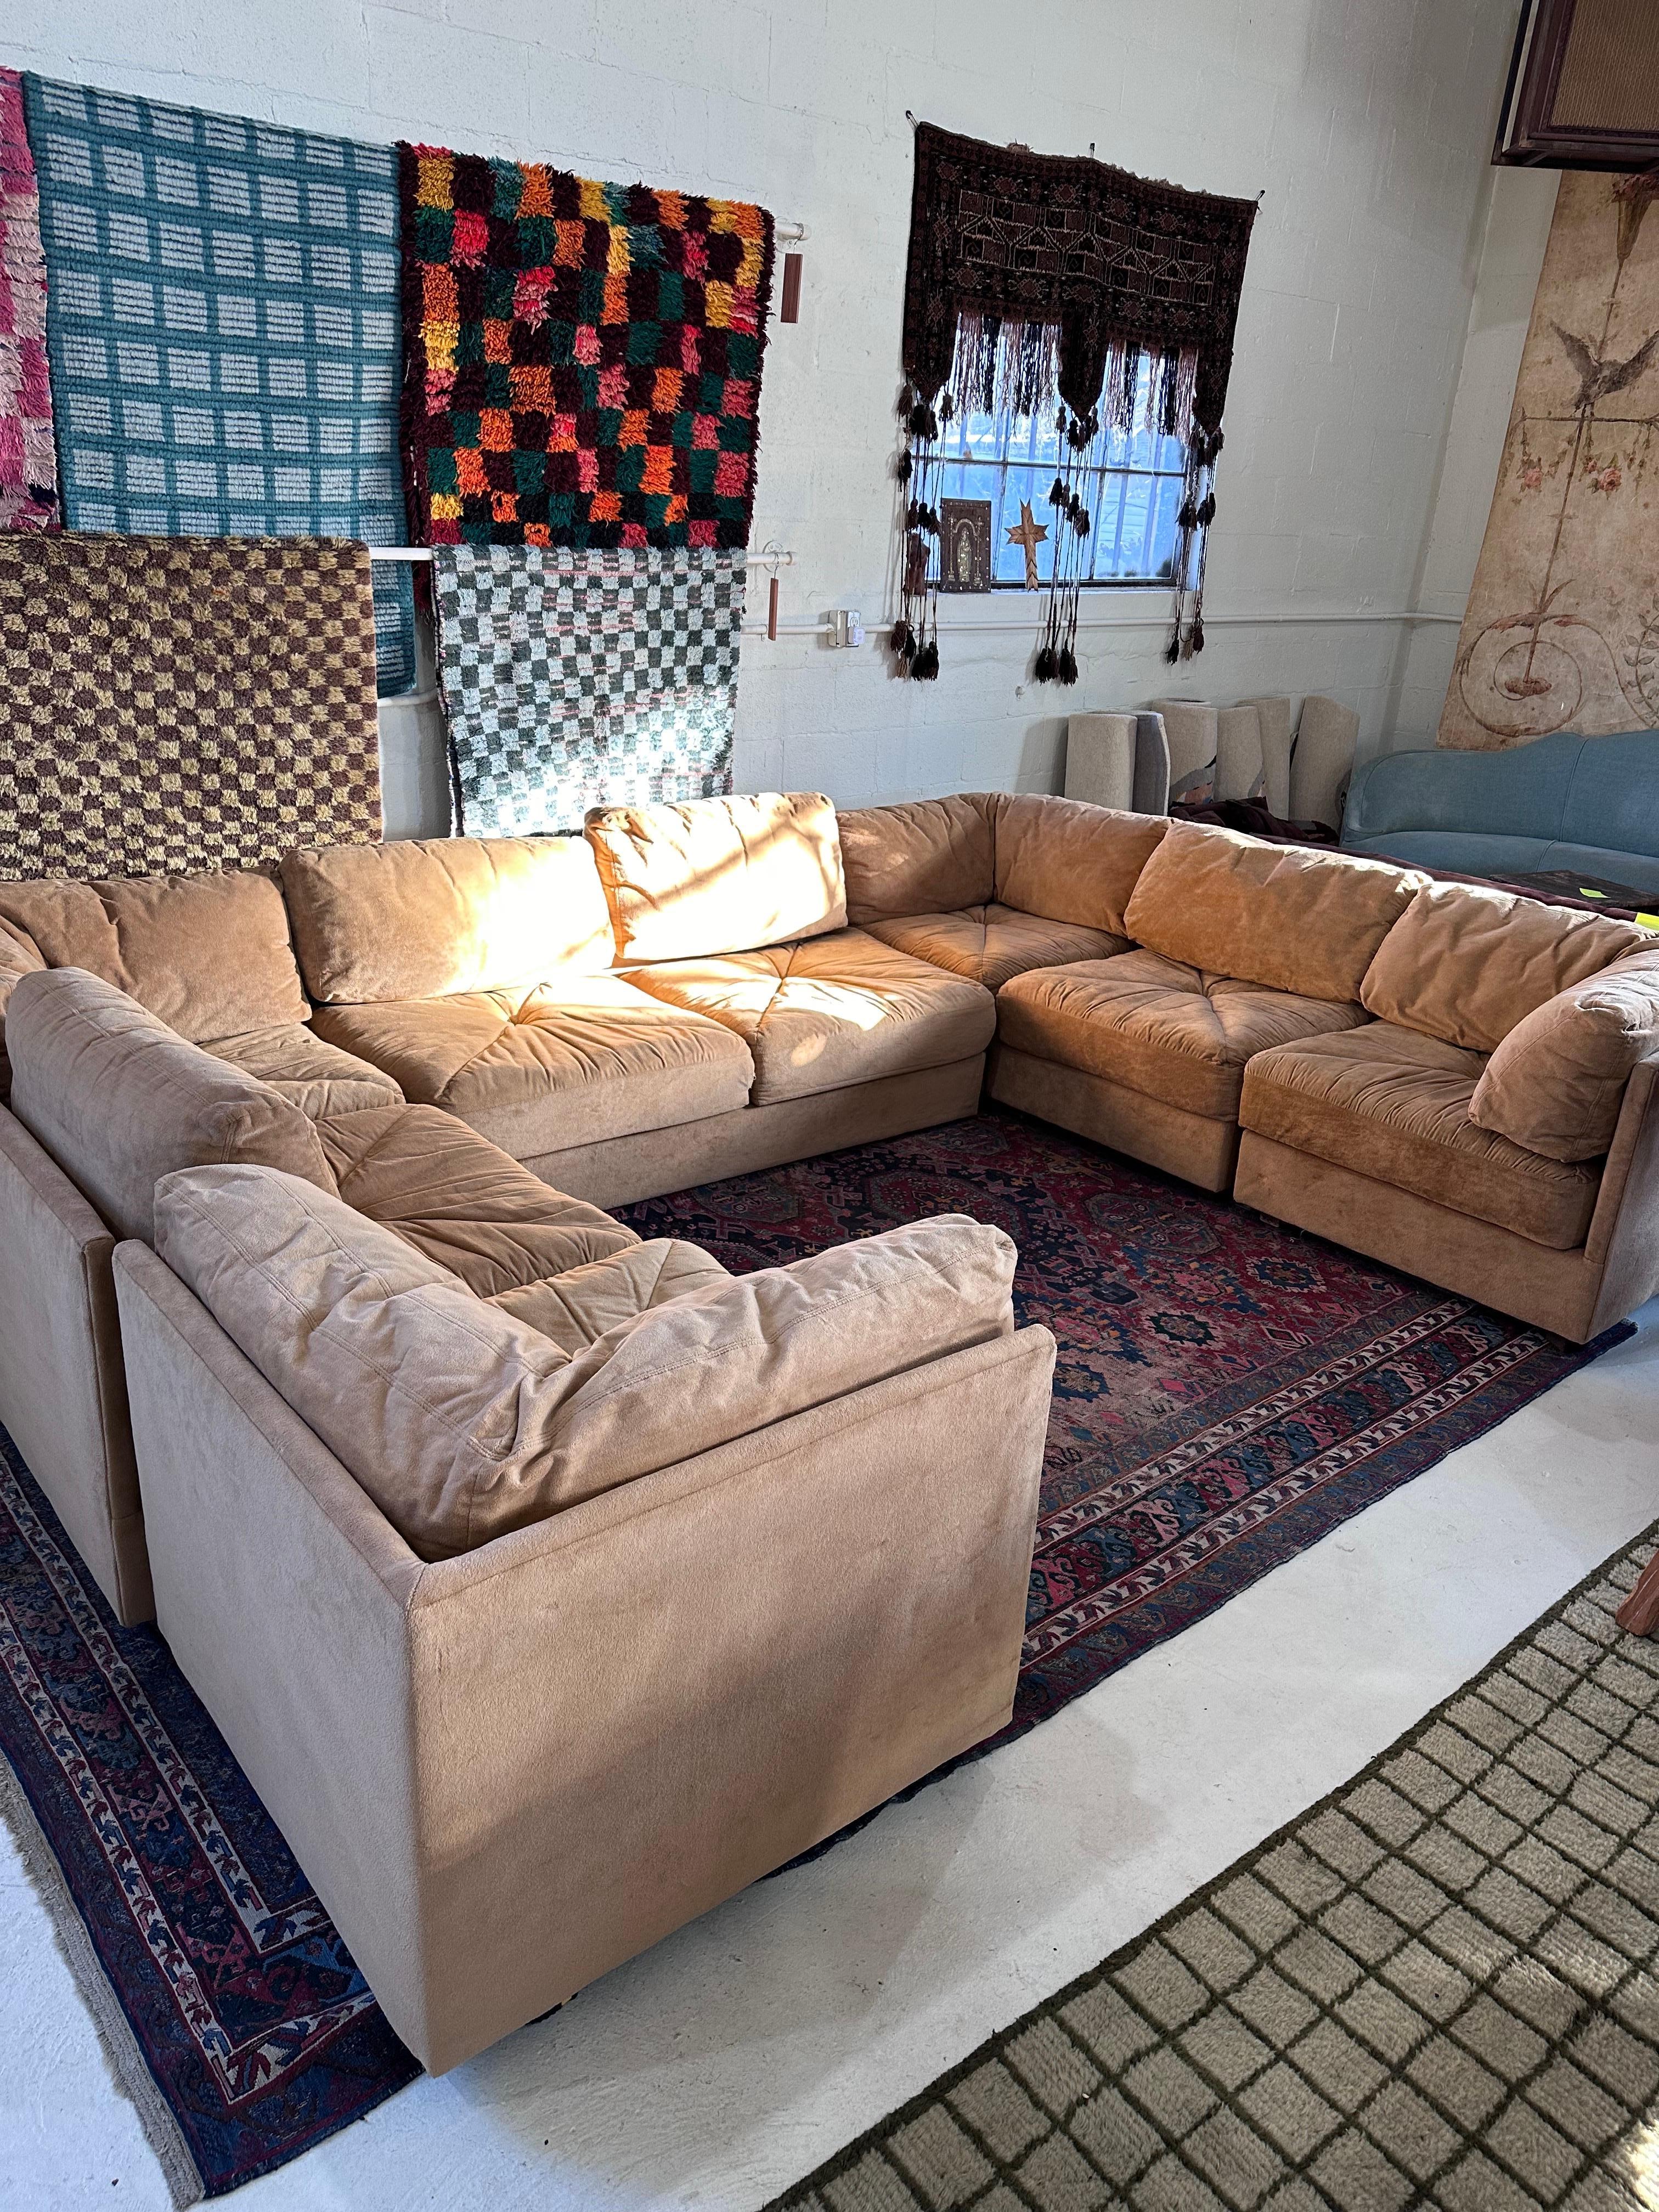 7-piece Milo Baughman style cube modular sofa with pullout full-sized bed. Original velvet-like upholstery is in perfect condition with only minor signs of age including a small rub and one small, almost unnoticed tear on the side of one section.